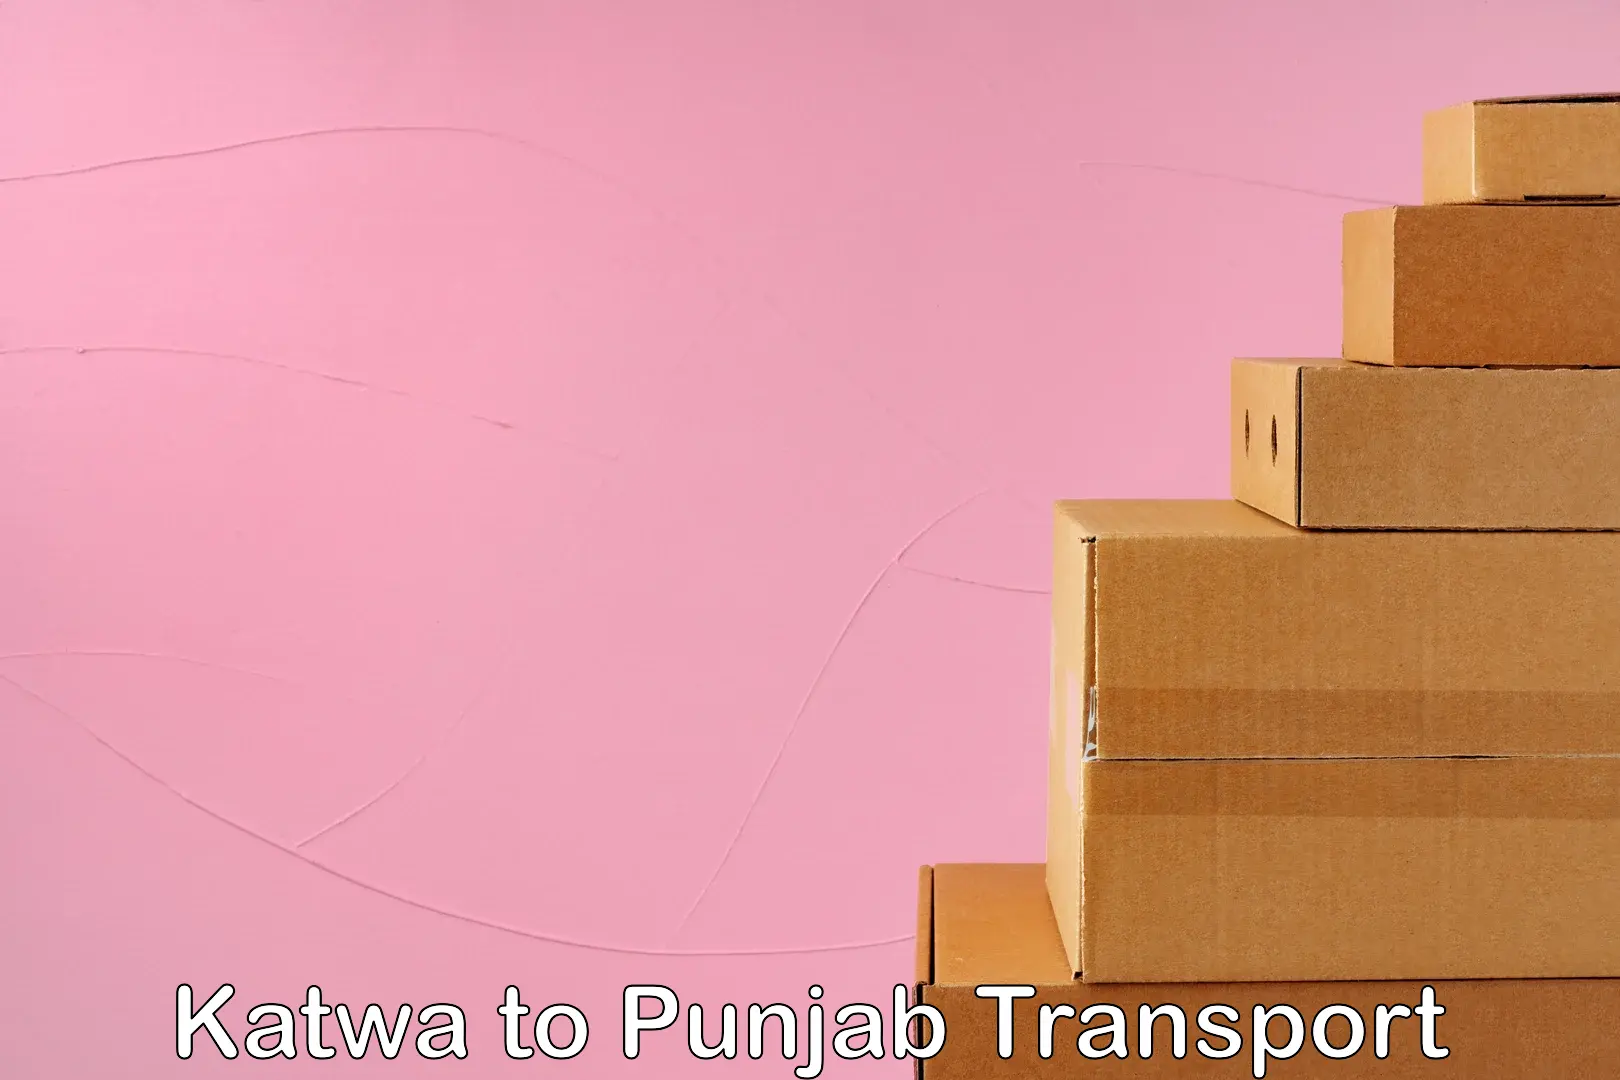 Transport shared services in Katwa to Amritsar